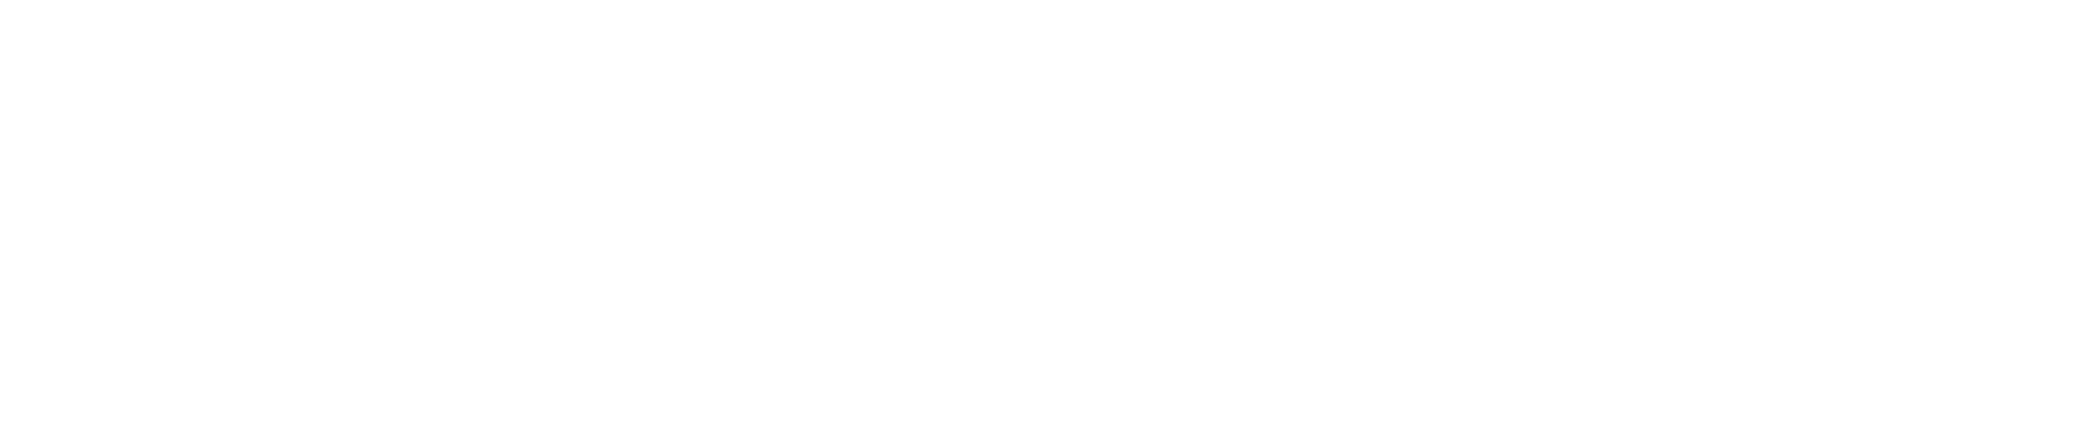 Witherell's logo